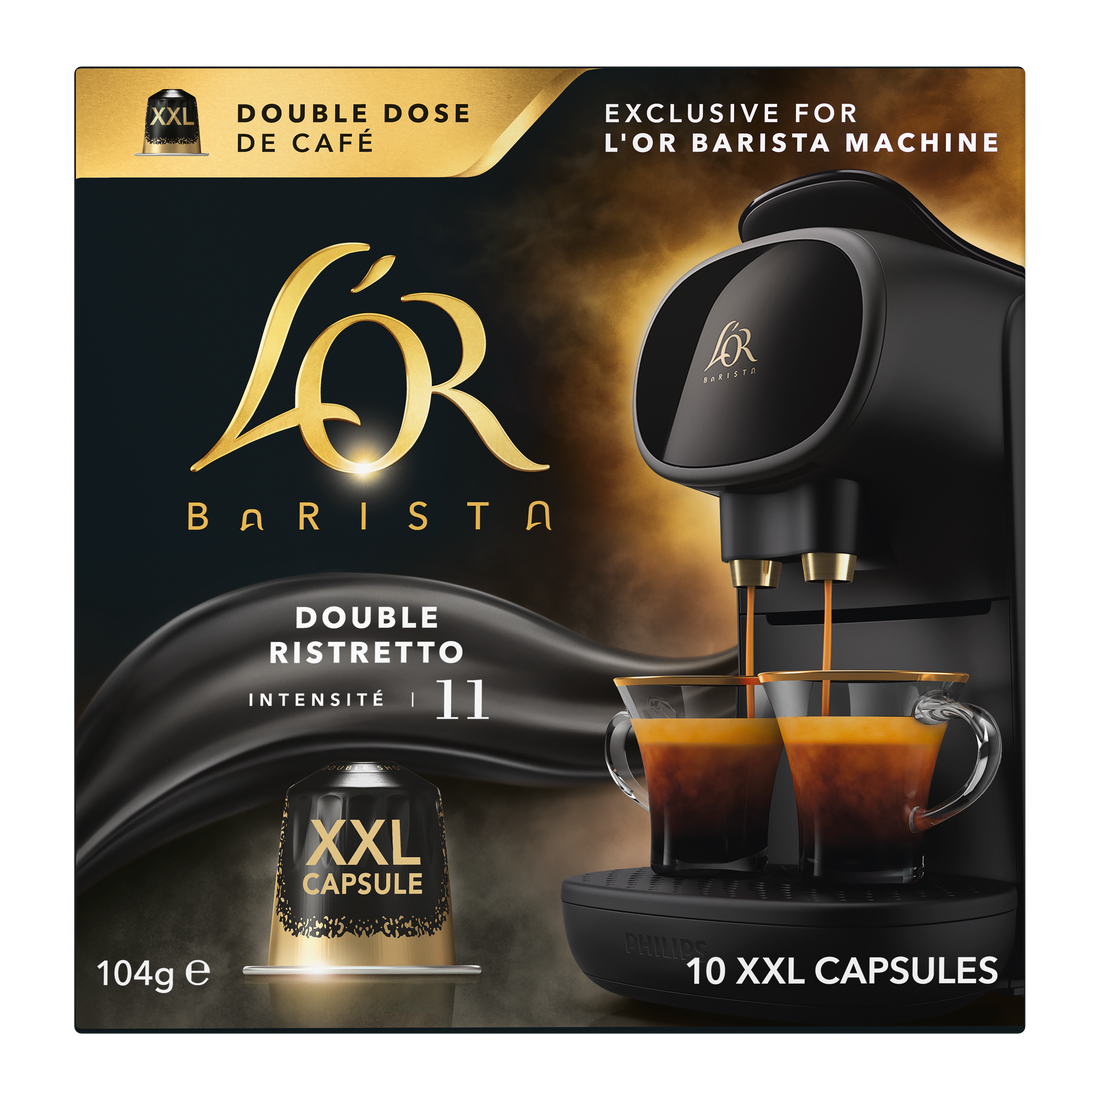 L'OR Coffee USA - GIVEAWAY🍂☕: Don't miss out on the chance to